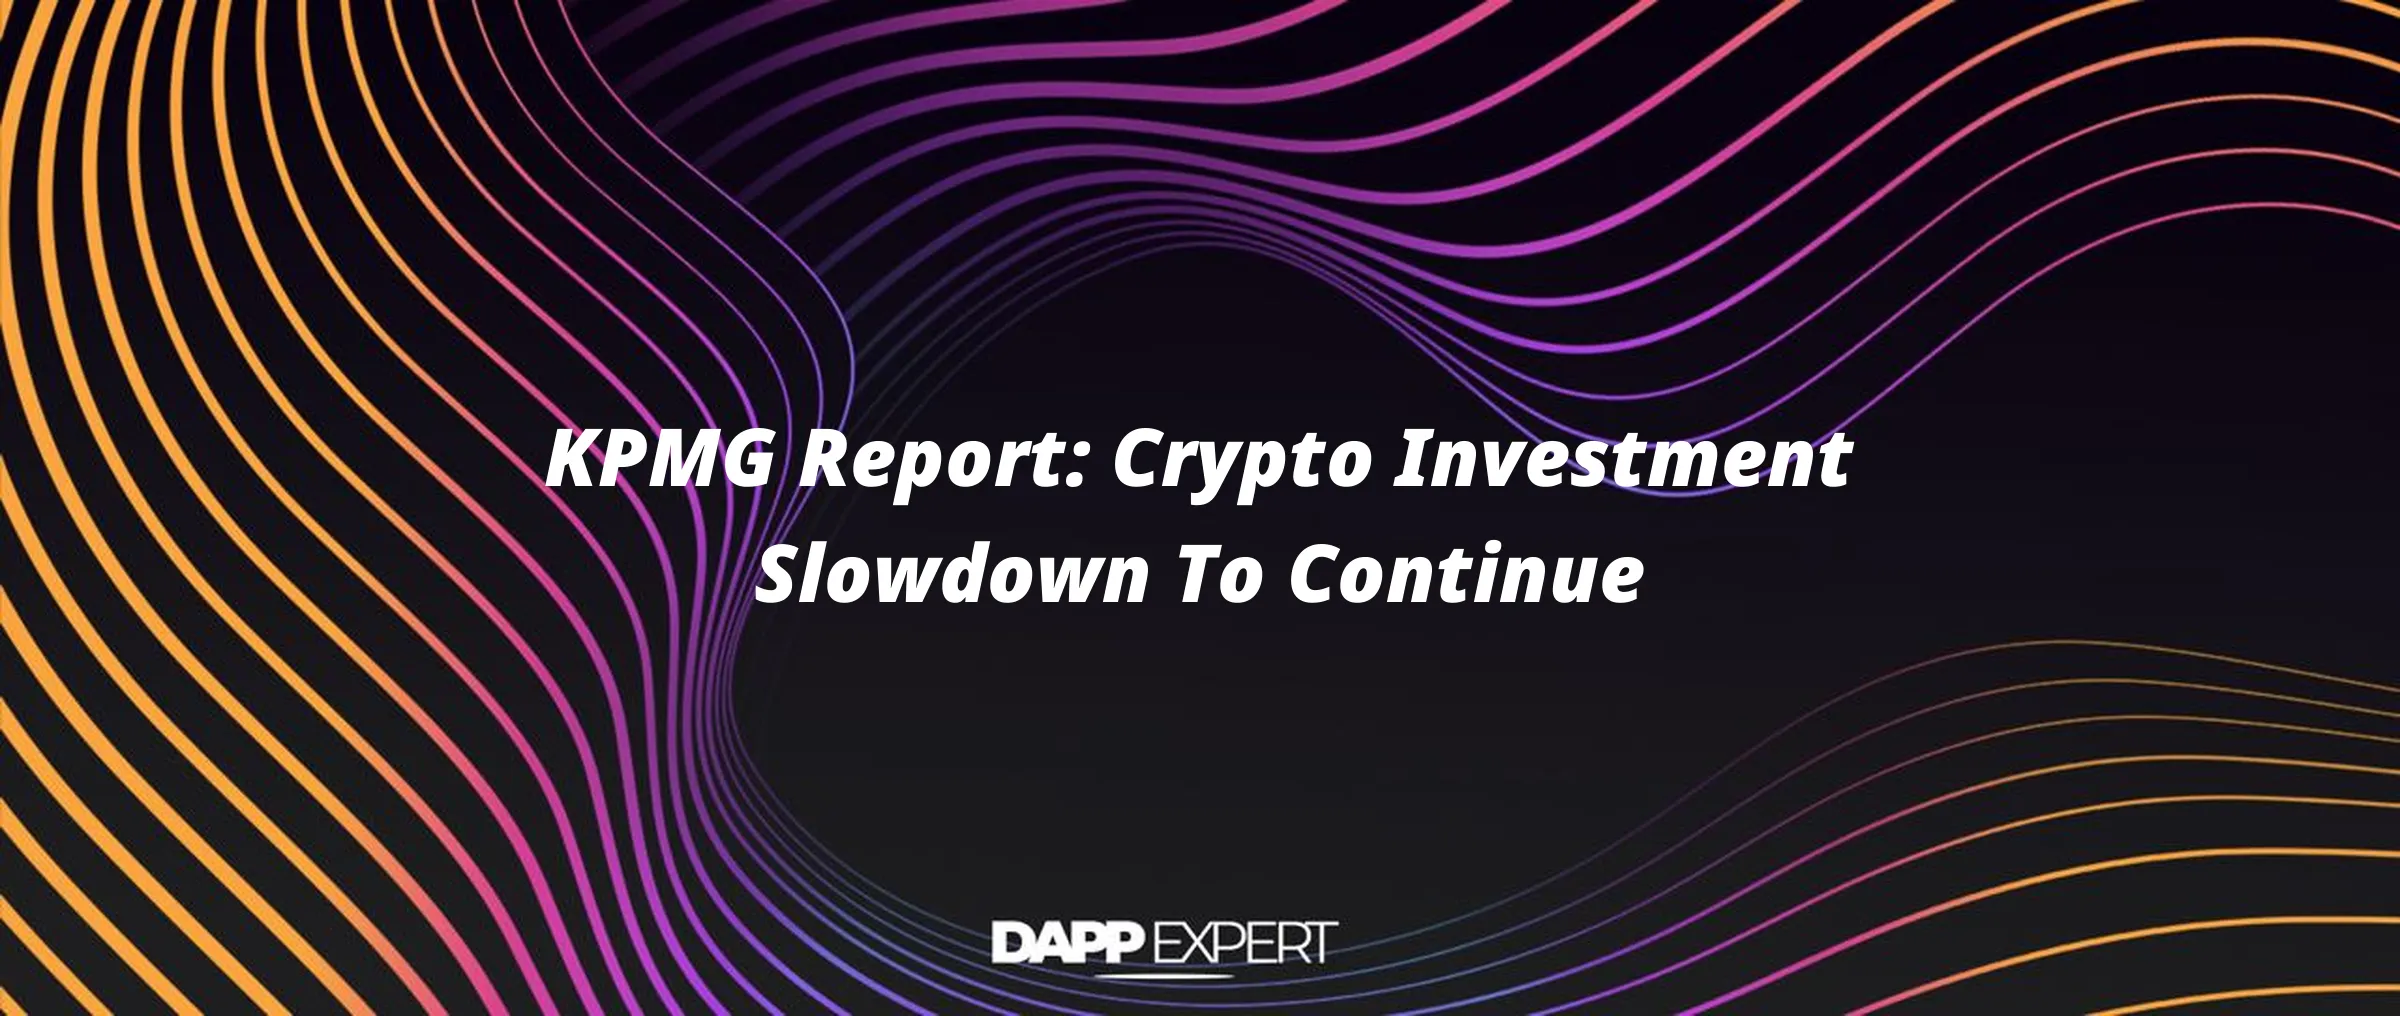 KPMG Report: Crypto Investment Slowdown To Continue